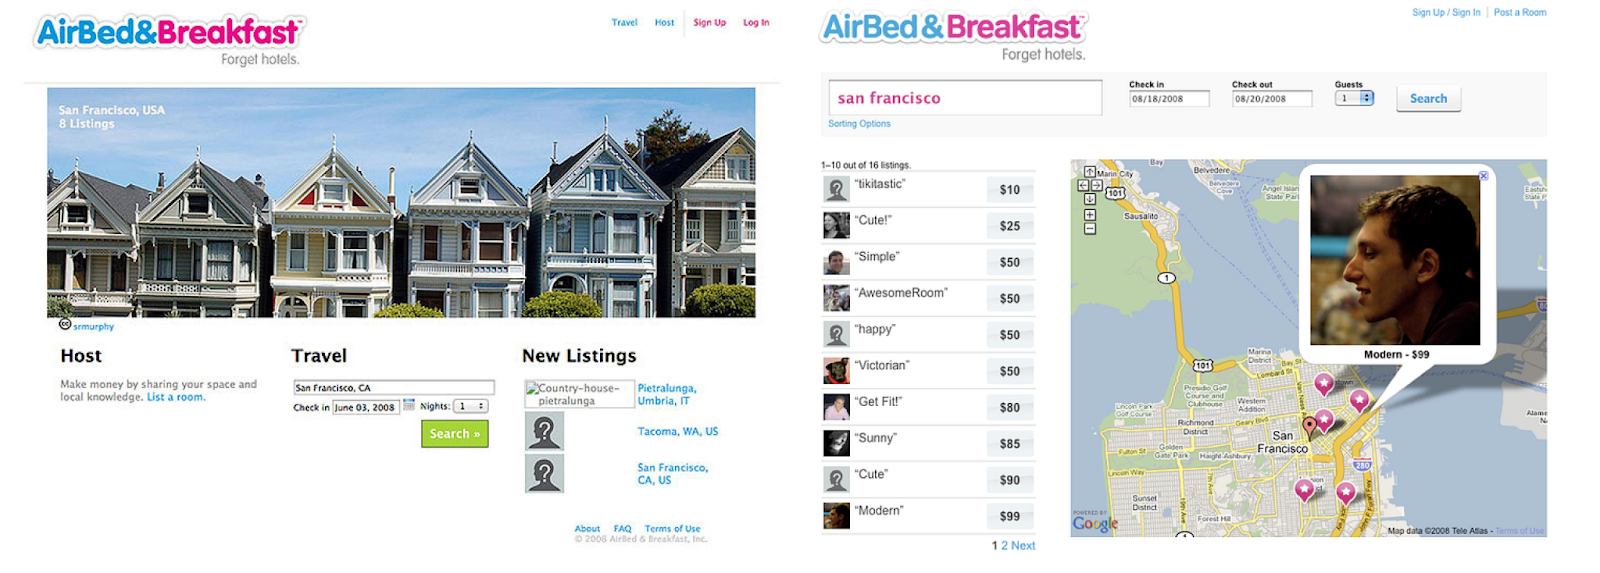 AirBedandBreakfast, Arbnb MVP website home page and search results.